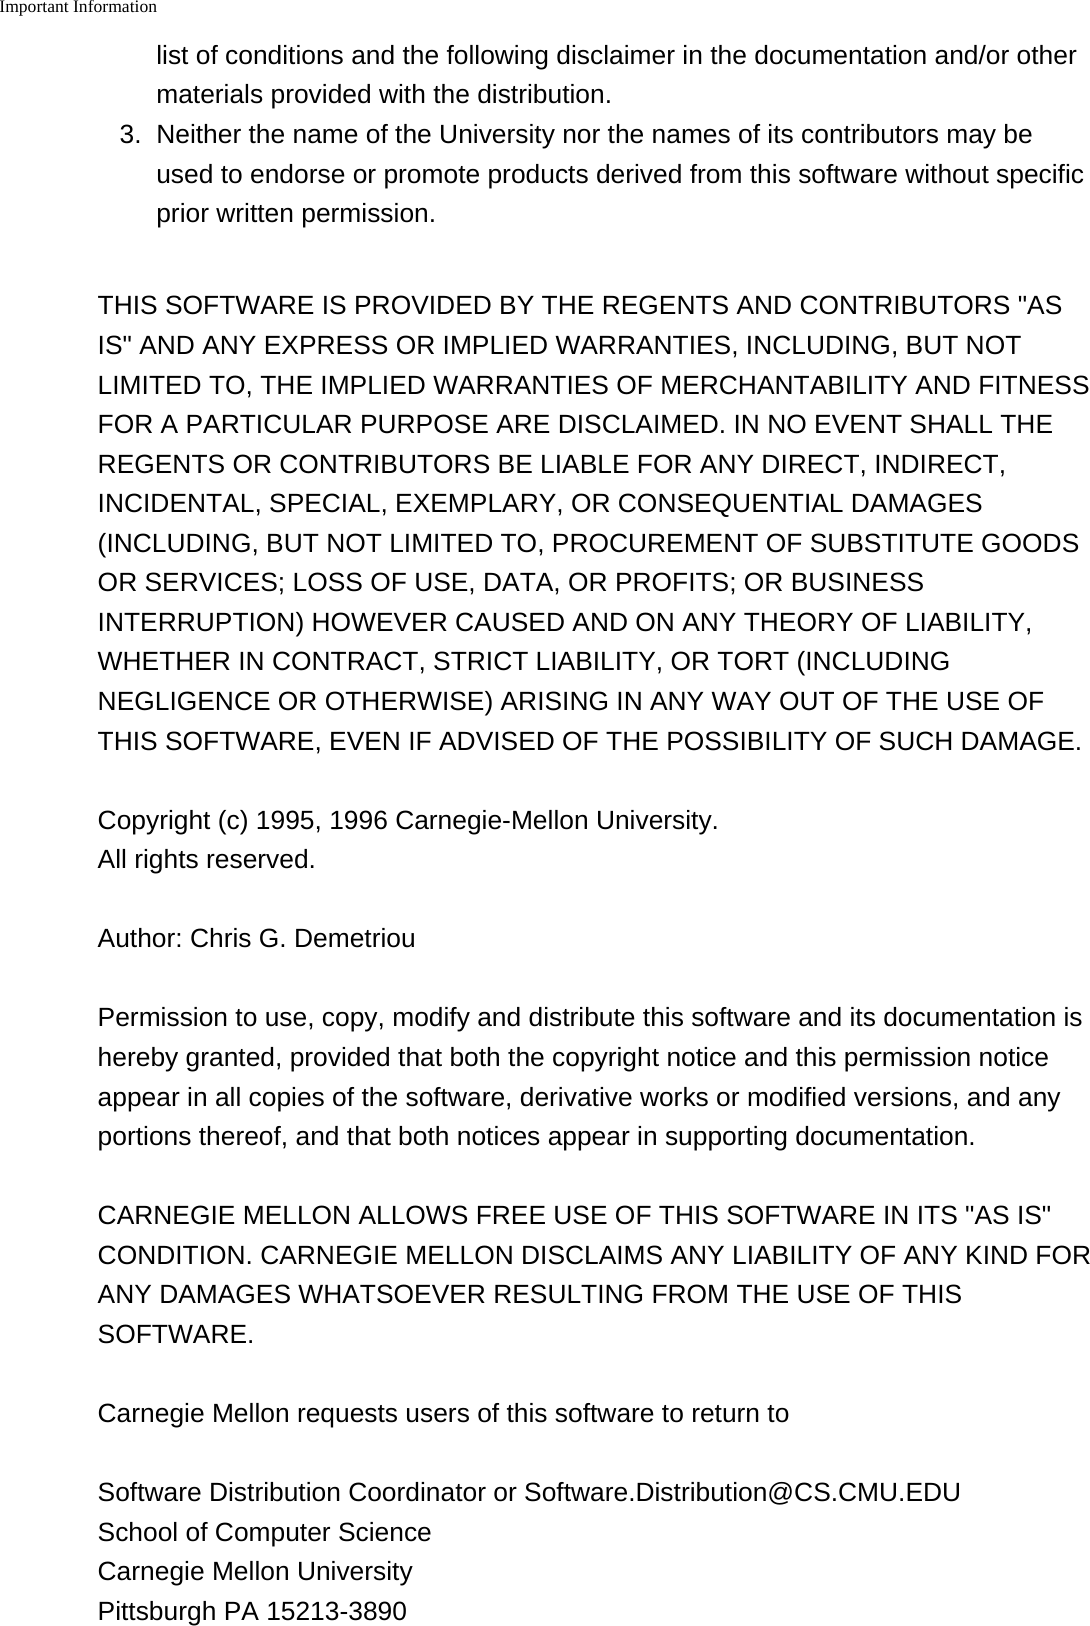 Important Information    list of conditions and the following disclaimer in the documentation and/or othermaterials provided with the distribution.3. Neither the name of the University nor the names of its contributors may beused to endorse or promote products derived from this software without specificprior written permission.THIS SOFTWARE IS PROVIDED BY THE REGENTS AND CONTRIBUTORS &quot;ASIS&quot; AND ANY EXPRESS OR IMPLIED WARRANTIES, INCLUDING, BUT NOTLIMITED TO, THE IMPLIED WARRANTIES OF MERCHANTABILITY AND FITNESSFOR A PARTICULAR PURPOSE ARE DISCLAIMED. IN NO EVENT SHALL THEREGENTS OR CONTRIBUTORS BE LIABLE FOR ANY DIRECT, INDIRECT,INCIDENTAL, SPECIAL, EXEMPLARY, OR CONSEQUENTIAL DAMAGES(INCLUDING, BUT NOT LIMITED TO, PROCUREMENT OF SUBSTITUTE GOODSOR SERVICES; LOSS OF USE, DATA, OR PROFITS; OR BUSINESSINTERRUPTION) HOWEVER CAUSED AND ON ANY THEORY OF LIABILITY,WHETHER IN CONTRACT, STRICT LIABILITY, OR TORT (INCLUDINGNEGLIGENCE OR OTHERWISE) ARISING IN ANY WAY OUT OF THE USE OFTHIS SOFTWARE, EVEN IF ADVISED OF THE POSSIBILITY OF SUCH DAMAGE.Copyright (c) 1995, 1996 Carnegie-Mellon University.All rights reserved.Author: Chris G. DemetriouPermission to use, copy, modify and distribute this software and its documentation ishereby granted, provided that both the copyright notice and this permission noticeappear in all copies of the software, derivative works or modified versions, and anyportions thereof, and that both notices appear in supporting documentation.CARNEGIE MELLON ALLOWS FREE USE OF THIS SOFTWARE IN ITS &quot;AS IS&quot;CONDITION. CARNEGIE MELLON DISCLAIMS ANY LIABILITY OF ANY KIND FORANY DAMAGES WHATSOEVER RESULTING FROM THE USE OF THISSOFTWARE.Carnegie Mellon requests users of this software to return toSoftware Distribution Coordinator or Software.Distribution@CS.CMU.EDUSchool of Computer ScienceCarnegie Mellon UniversityPittsburgh PA 15213-3890